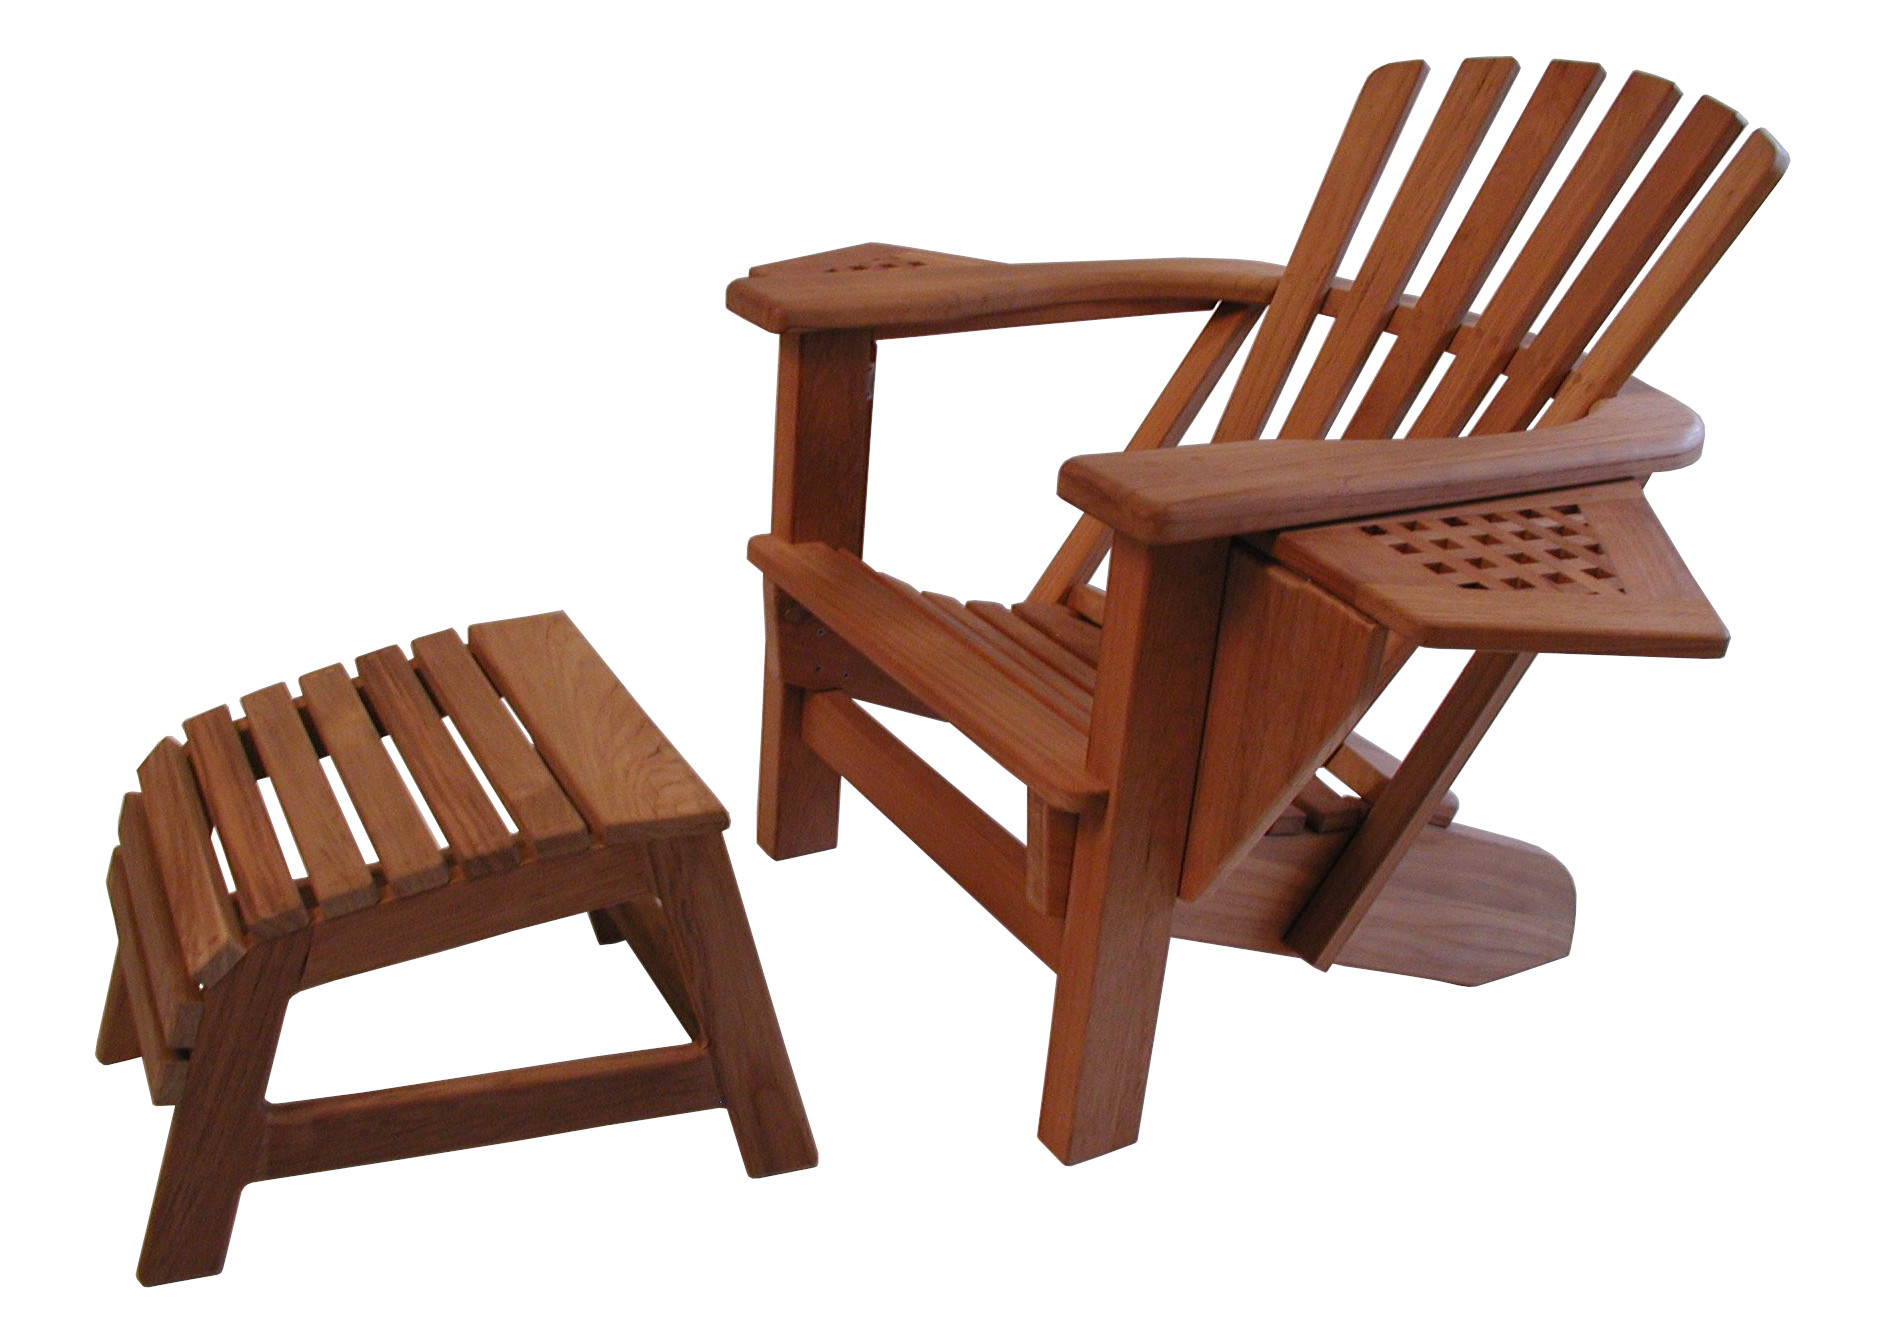 View of Adirondack chair with foot bench